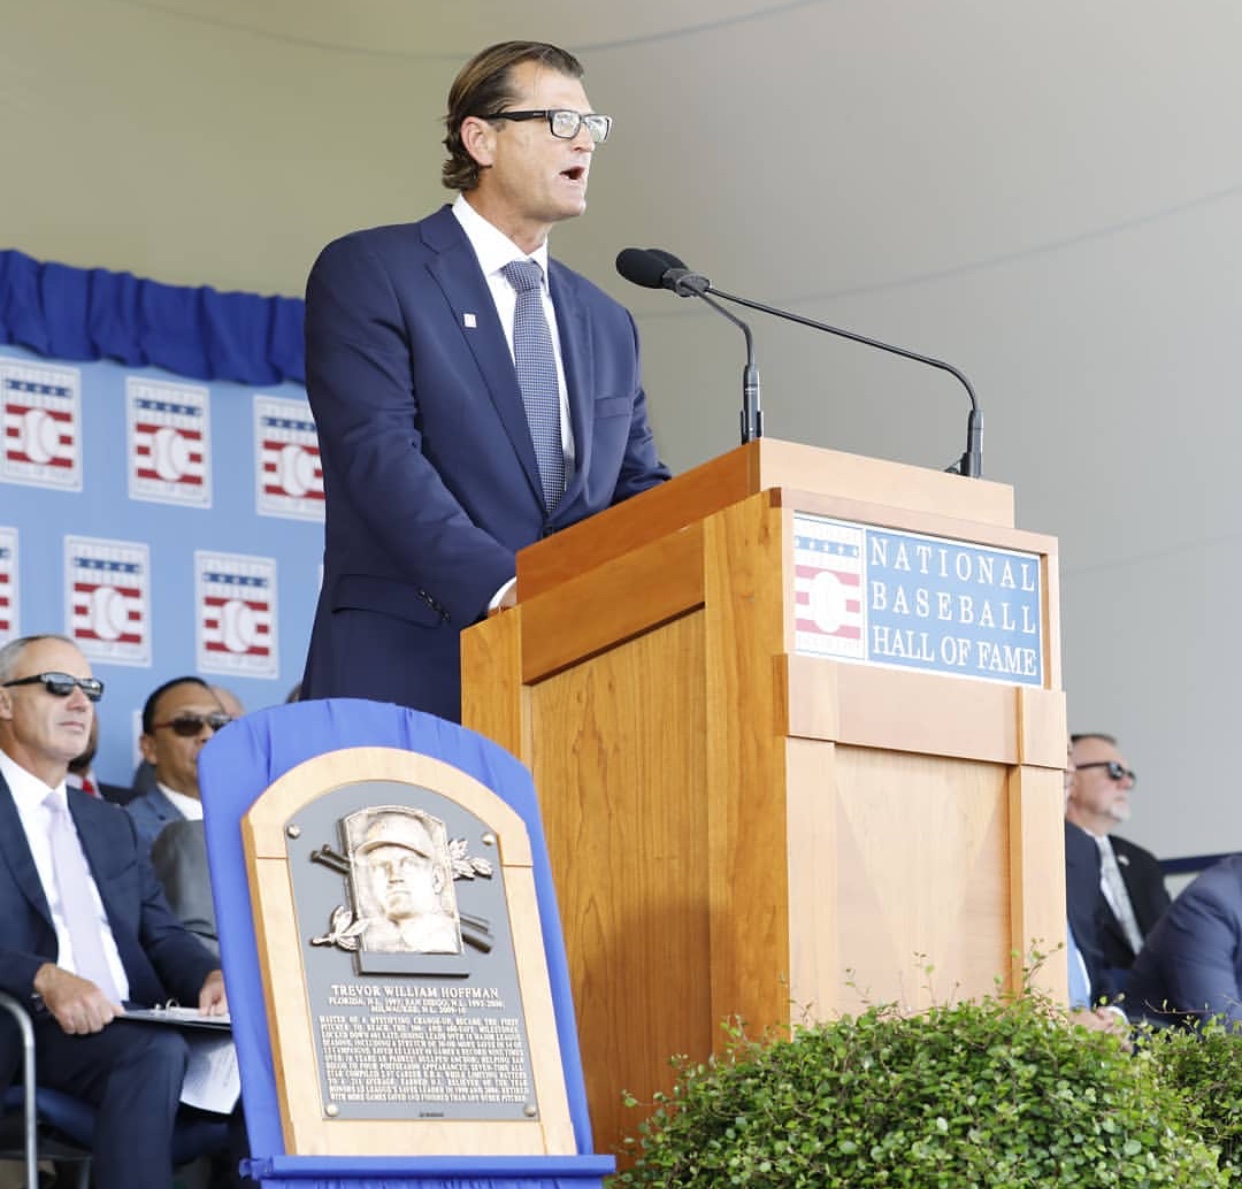 Trevor Hoffman gives much anticipated Hall of Fame speech in Cooperstown, NY with 53,000 fans in attendance.